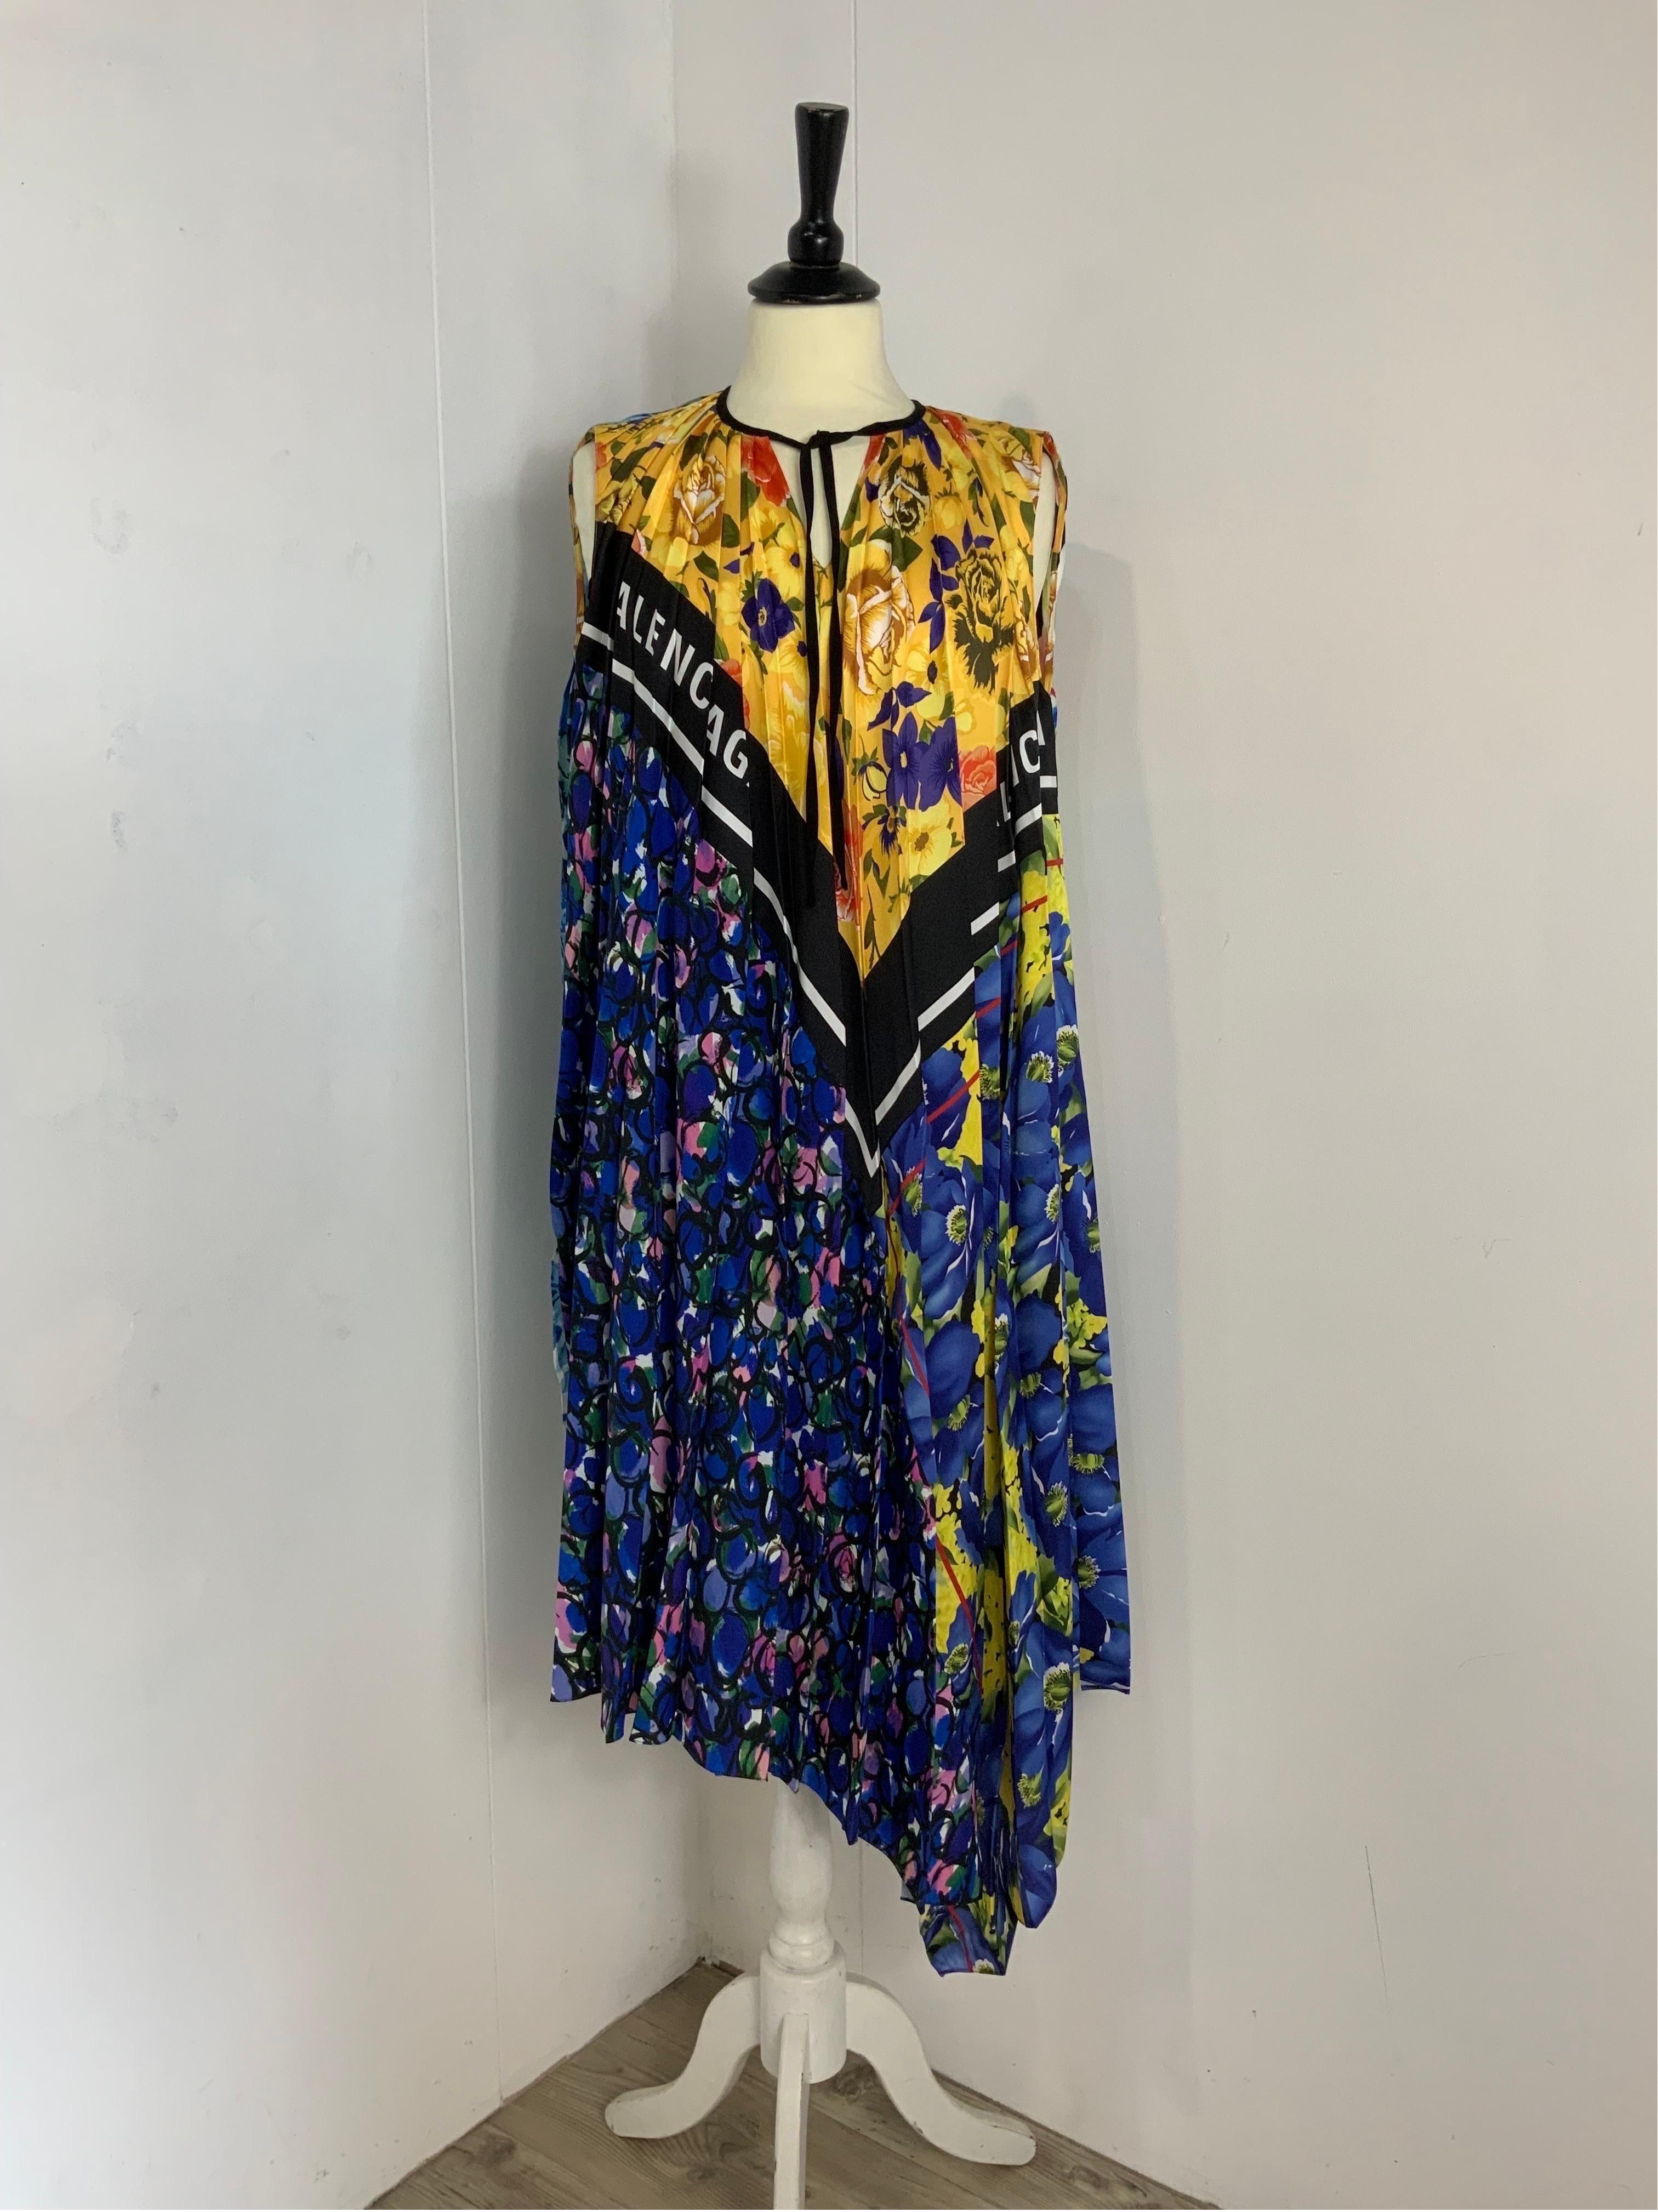 BALENCIAGA DRESS.
Resort 2019 collection
Made of polyester. Floral print.
French size 34 which corresponds to an Italian 38.
Shoulders 33 cm
Bust up to 60cm
Length 110 cm
New, with tag.